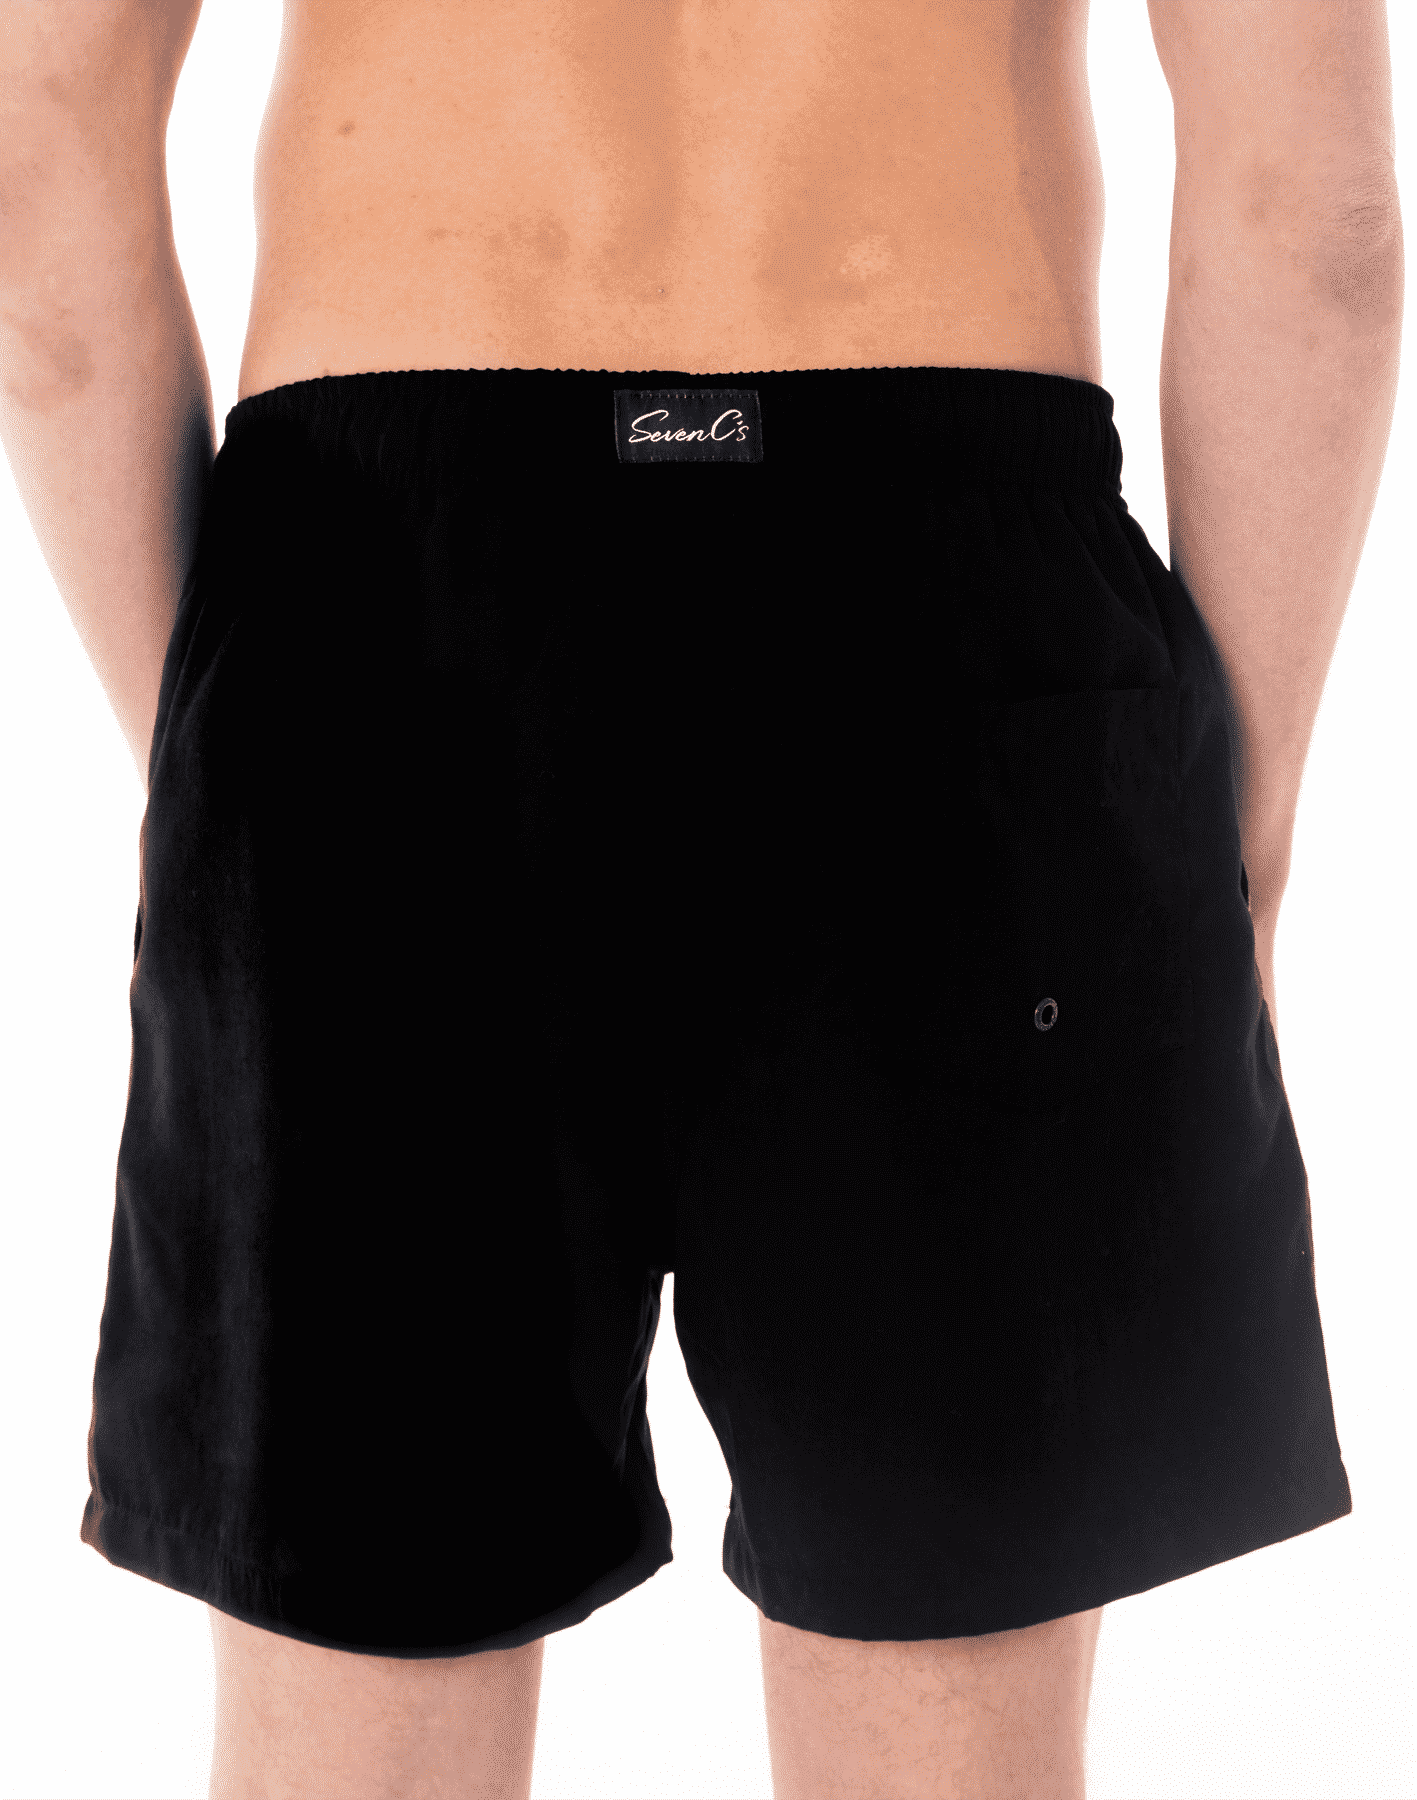 Sustainable Men's Black Shorts from SevenC's